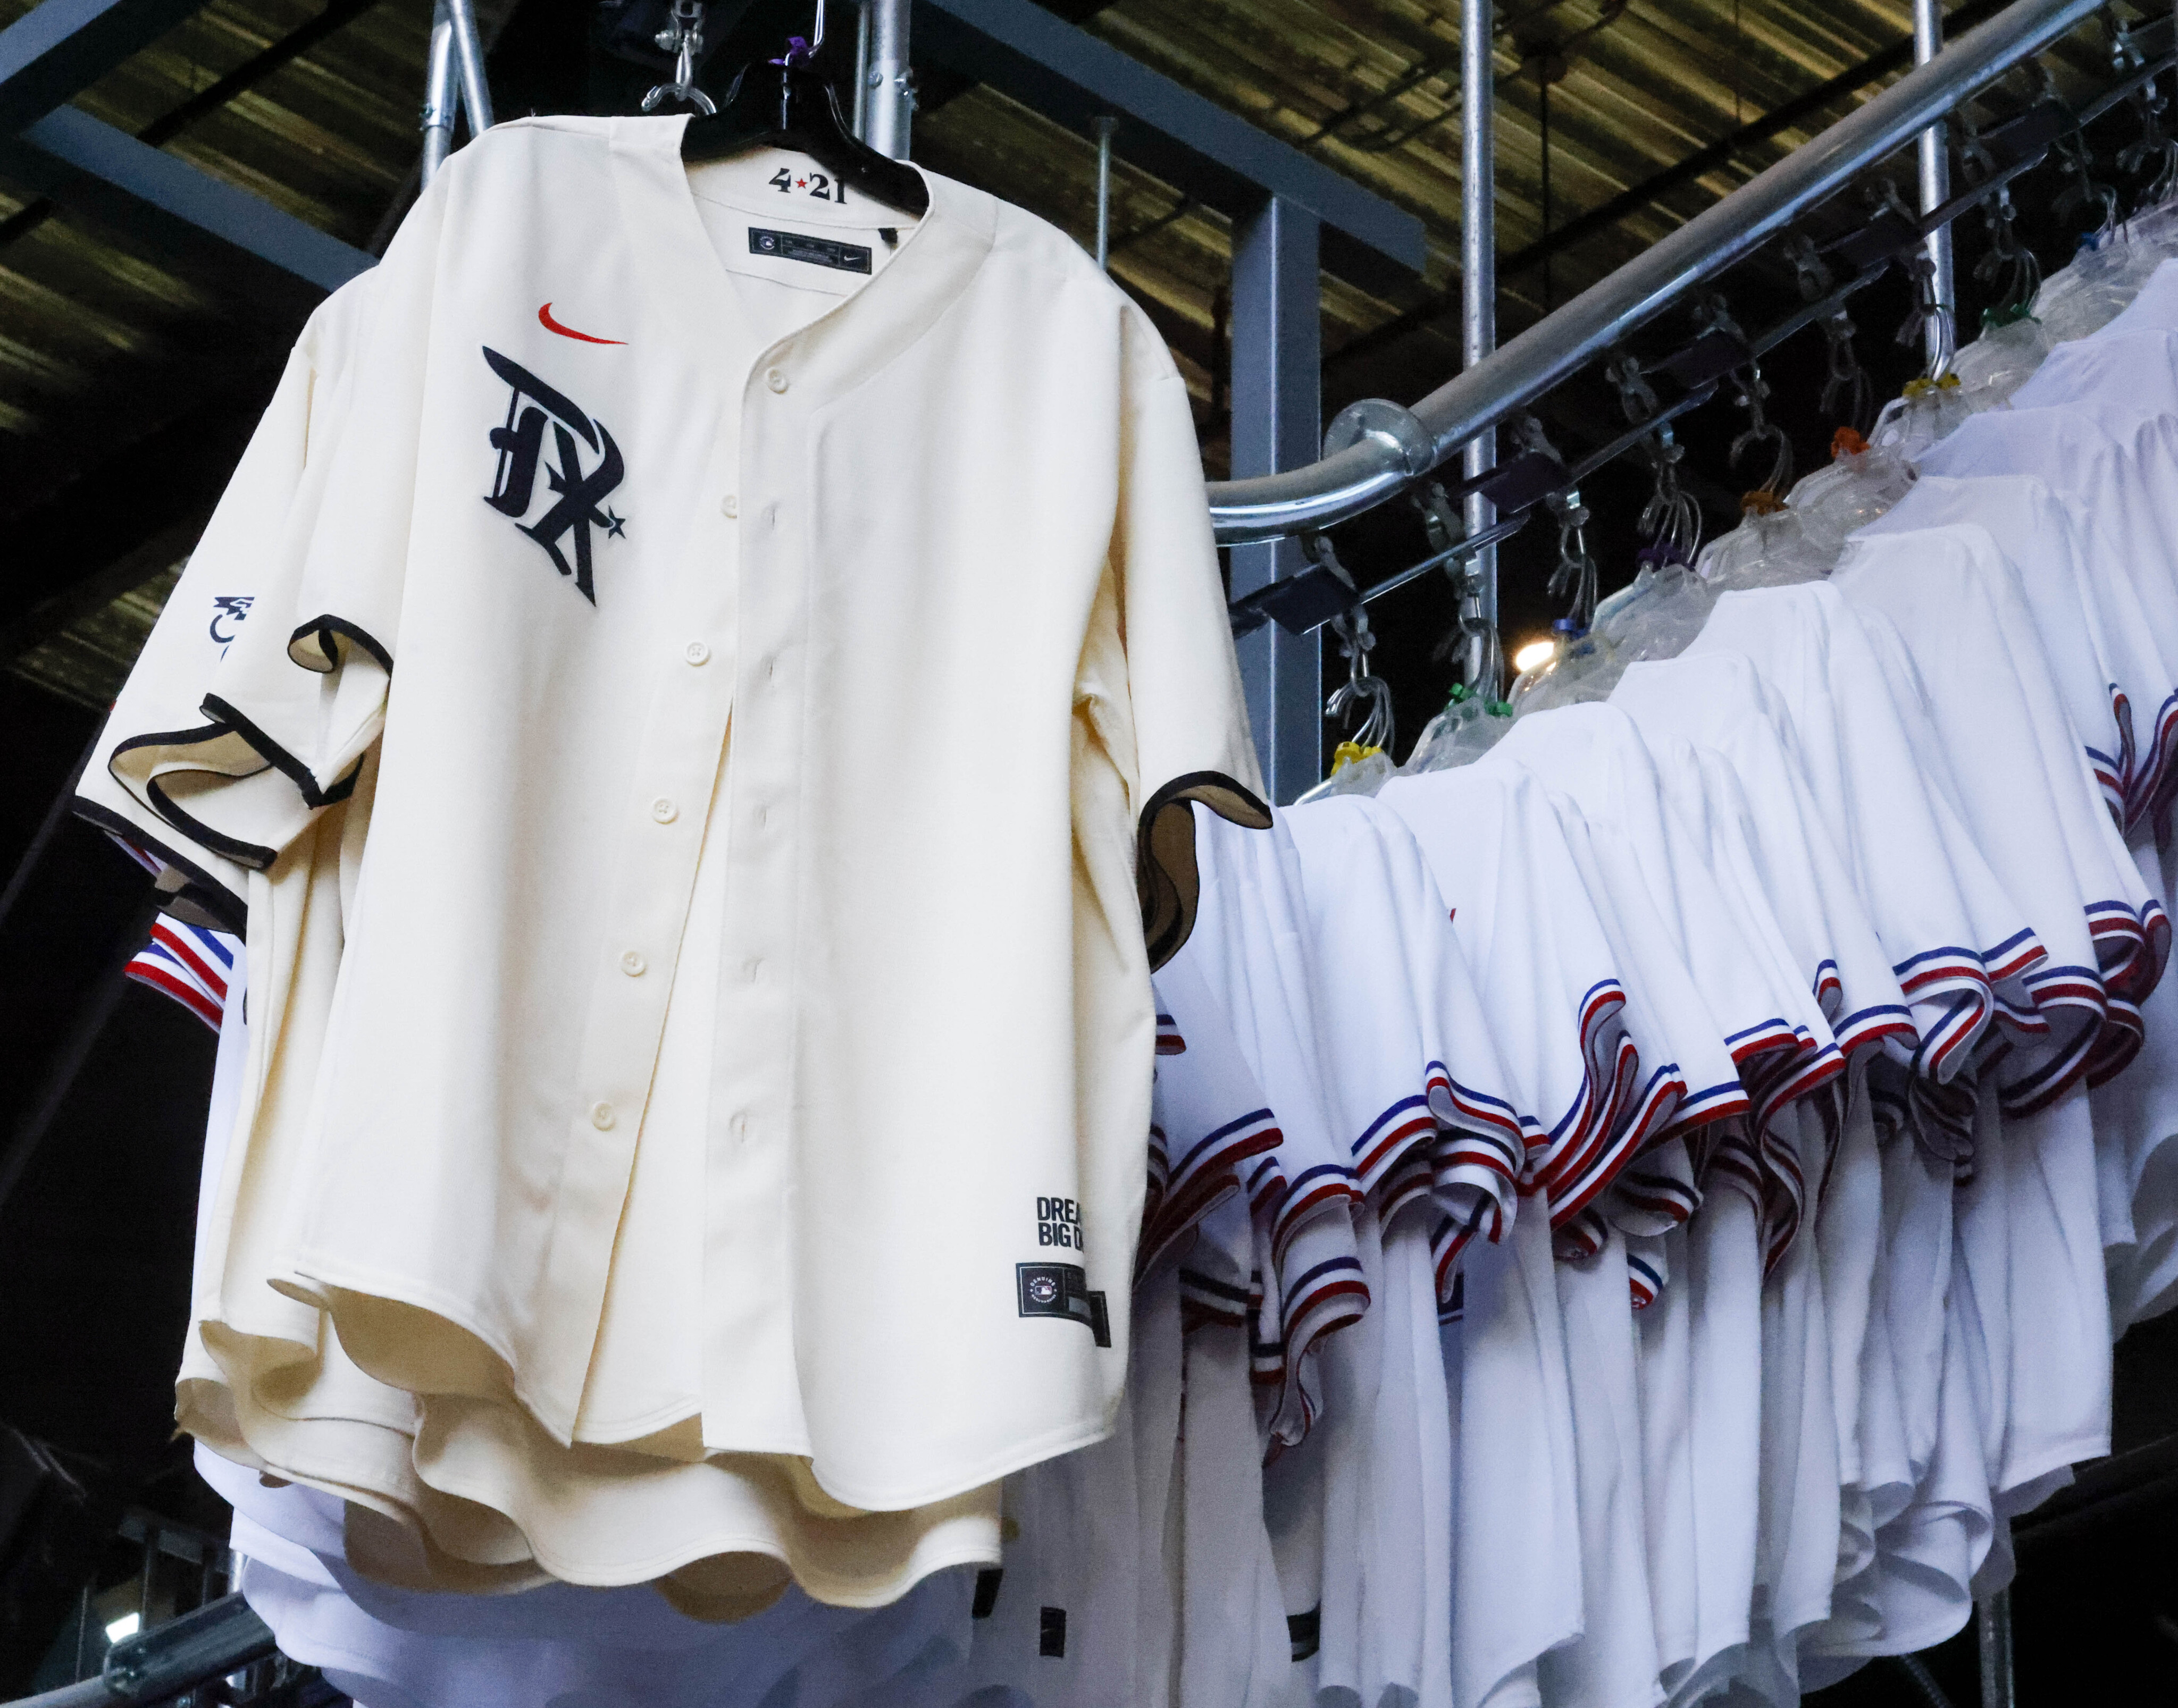 Photos: Rangers City Connect jerseys debut at Globe Life Field